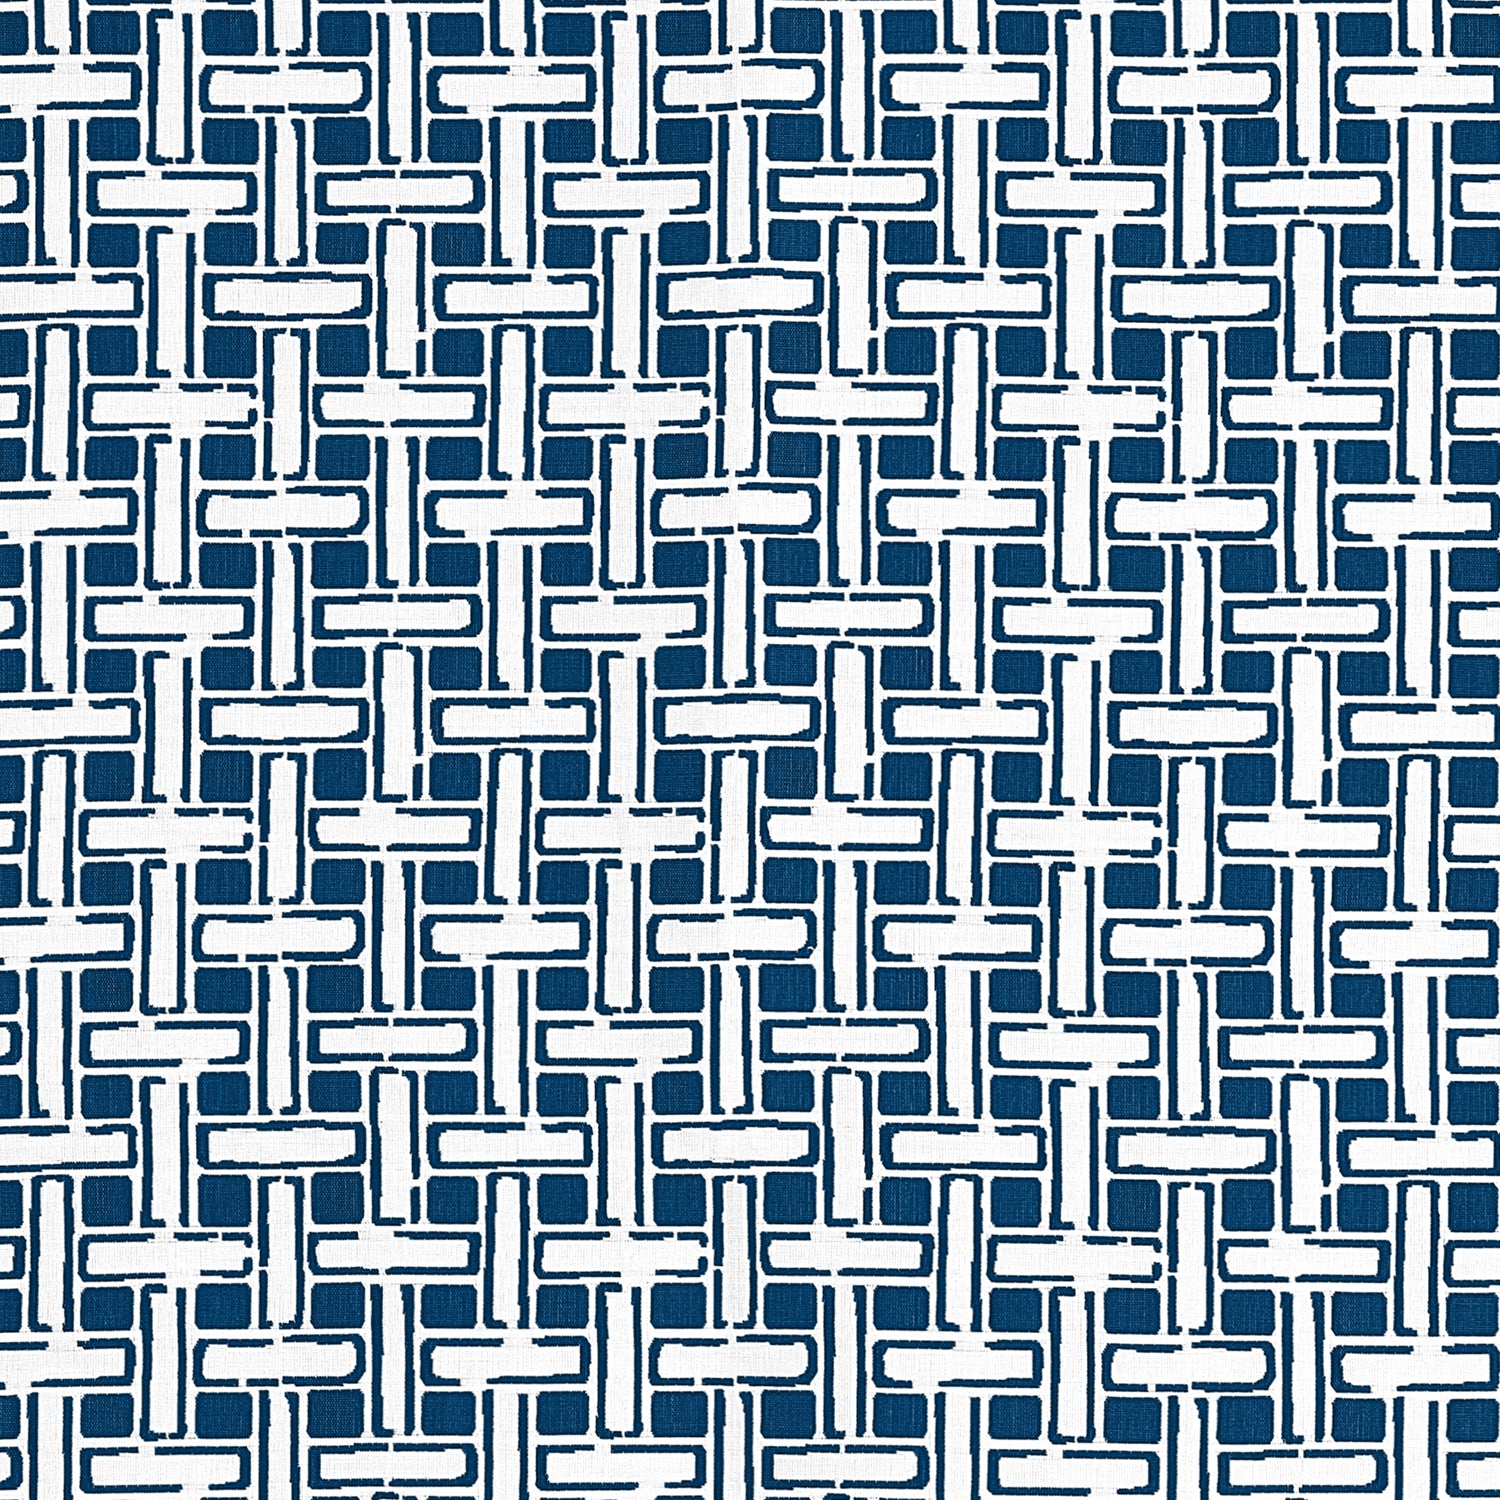 Panama Matelasse fabric in navy color - pattern number W81643 - by Thibaut in the Locale collection